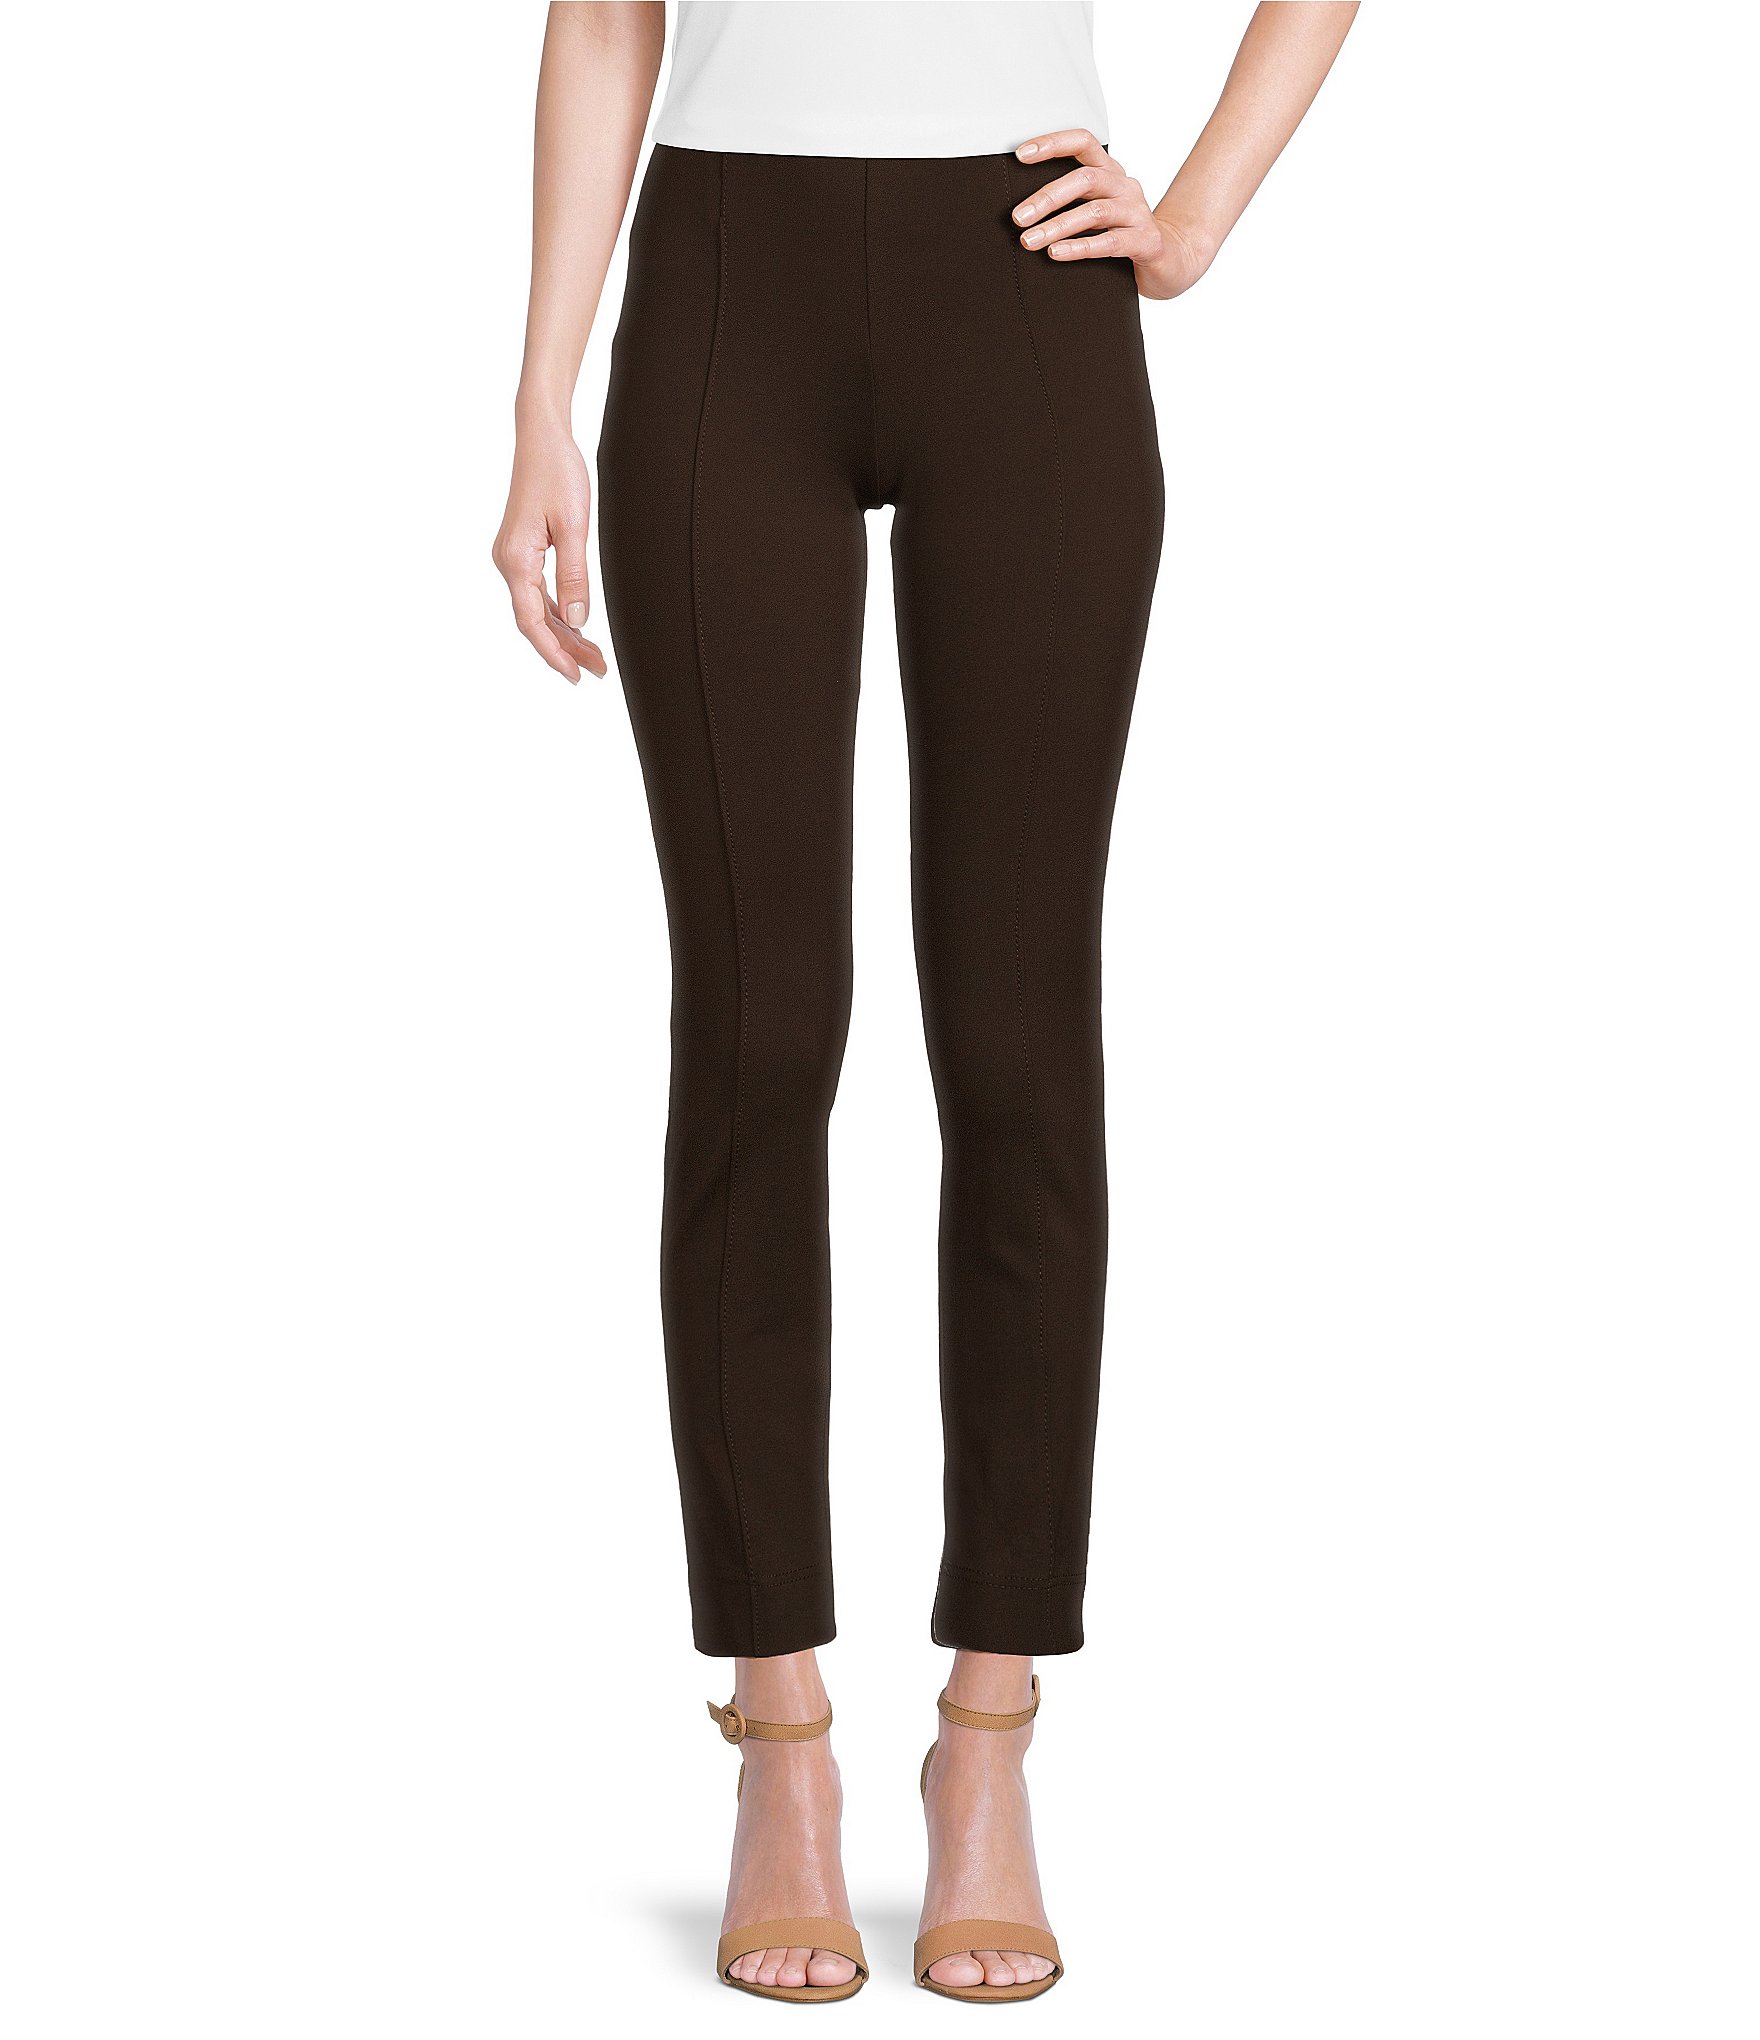 https://dimg.dillards.com/is/image/DillardsZoom/zoom/slim-factor-by-investments-core-ponte-knit-no-waist-ankle-pants/00000003_zi_8a29d87f-65ae-4dfa-a996-c6f94b76e55b.jpg